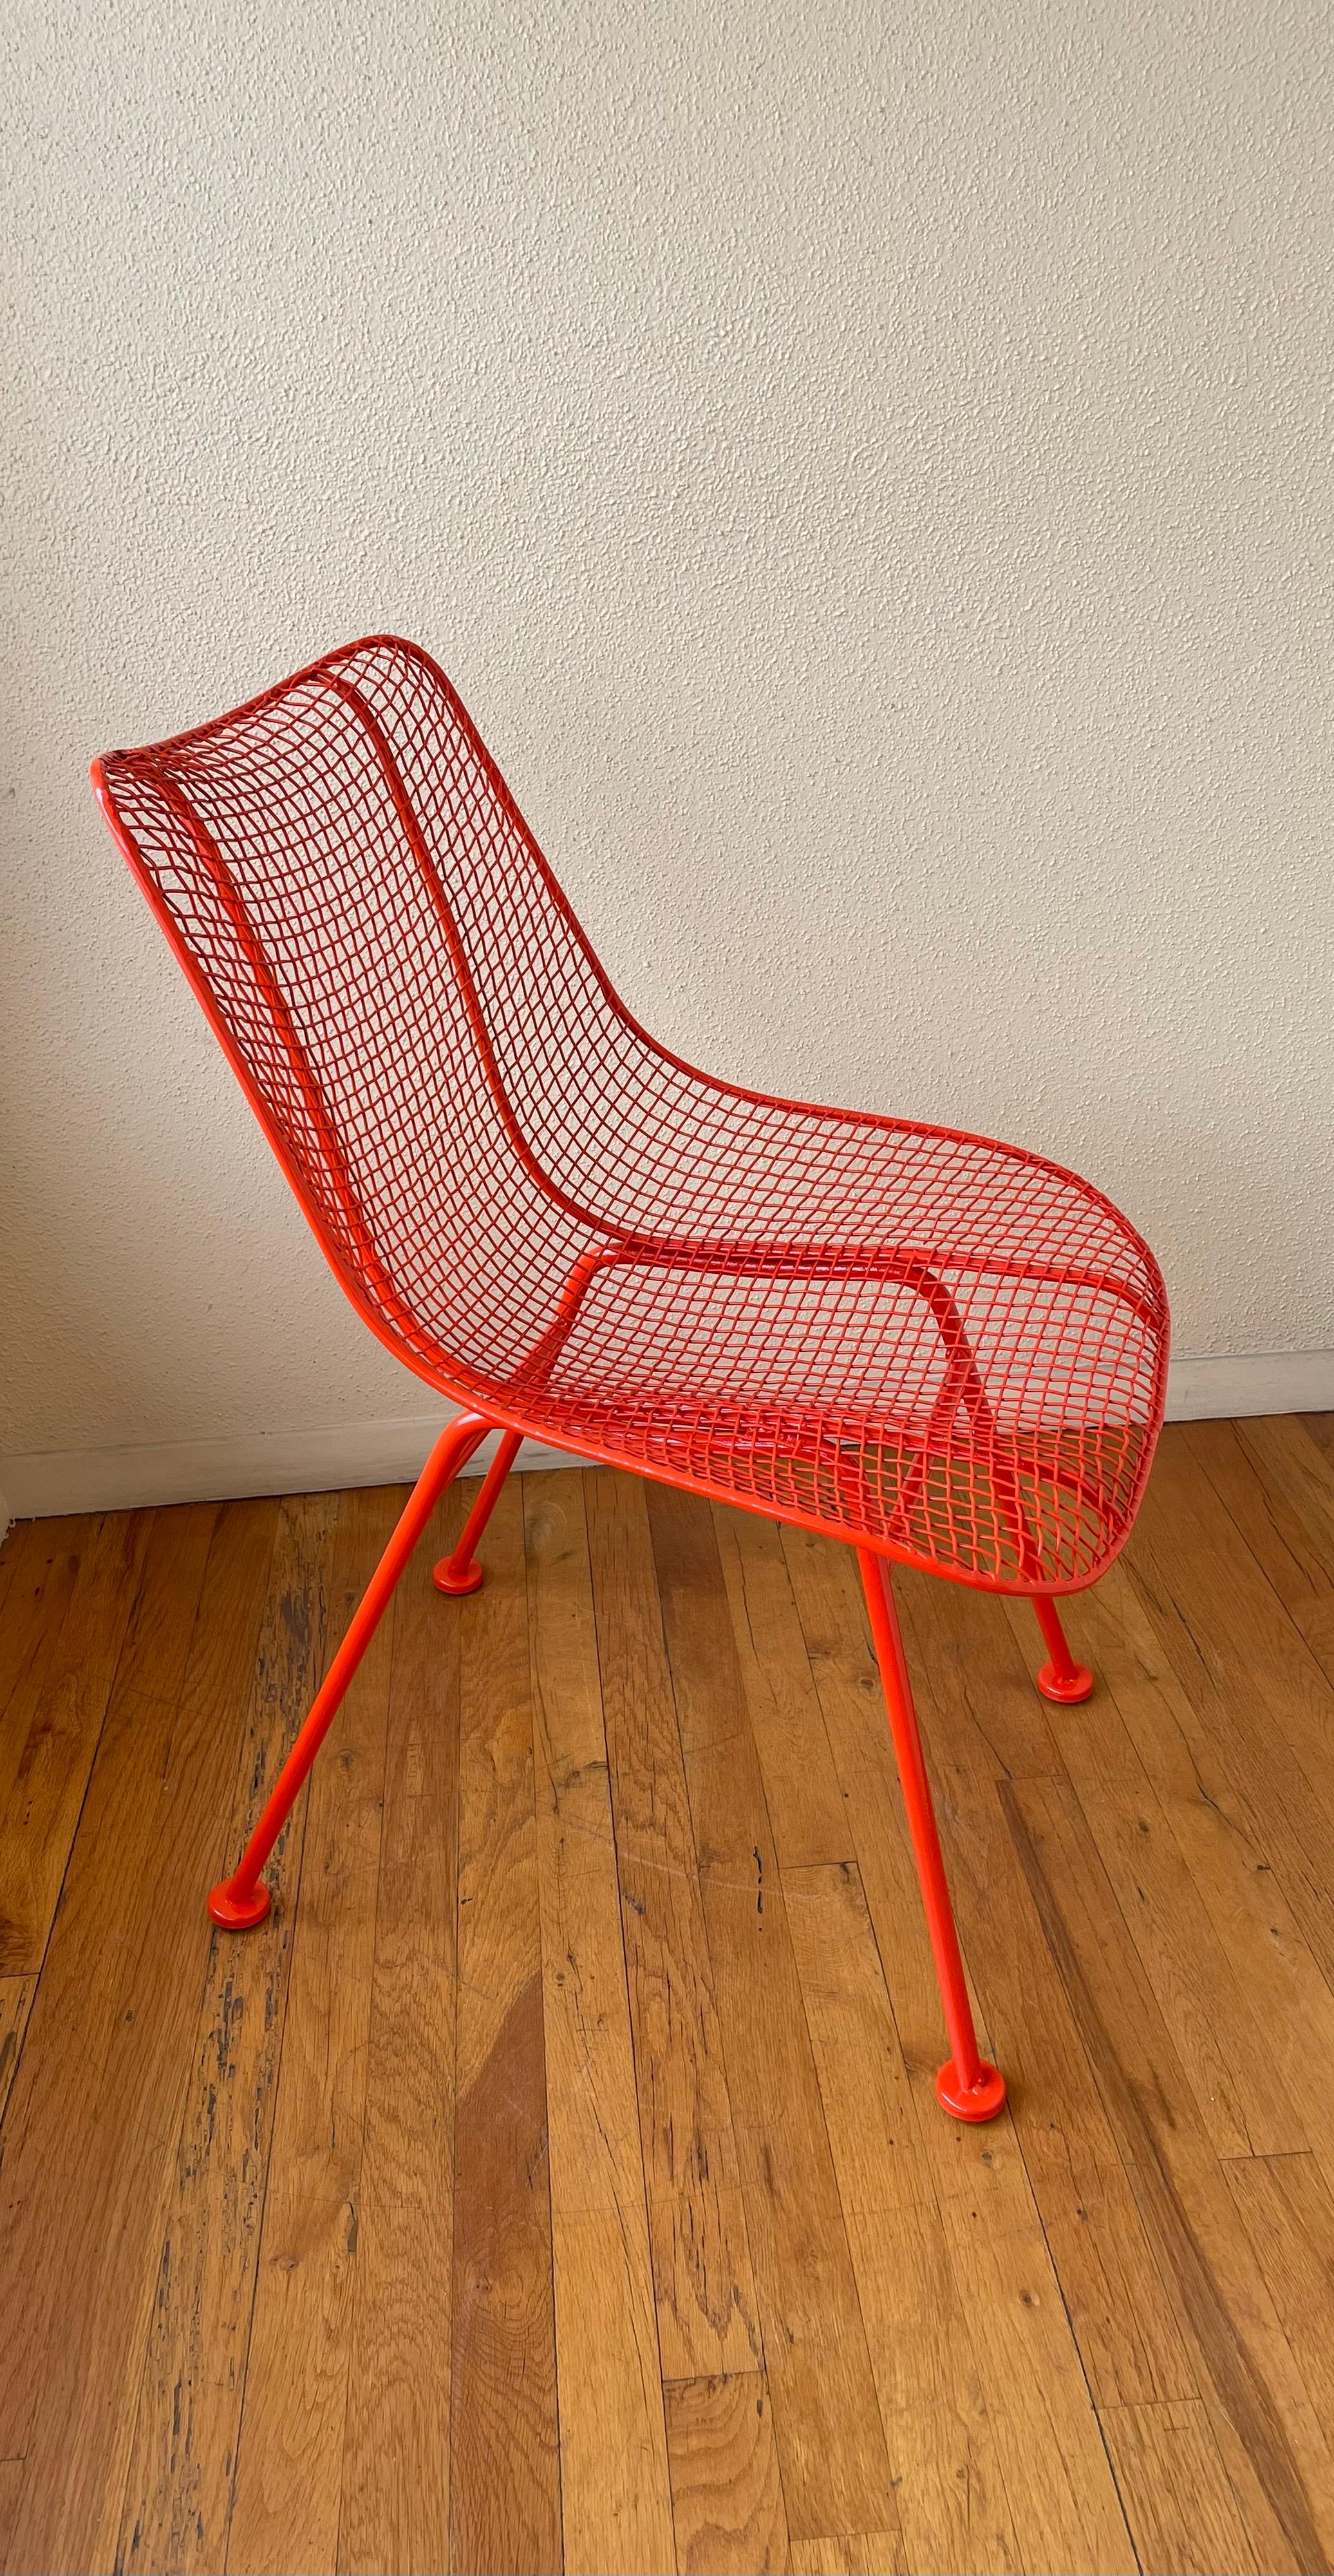 North American American Mid-Century Modern Sulptura Chair Design by Russell Woodard For Sale